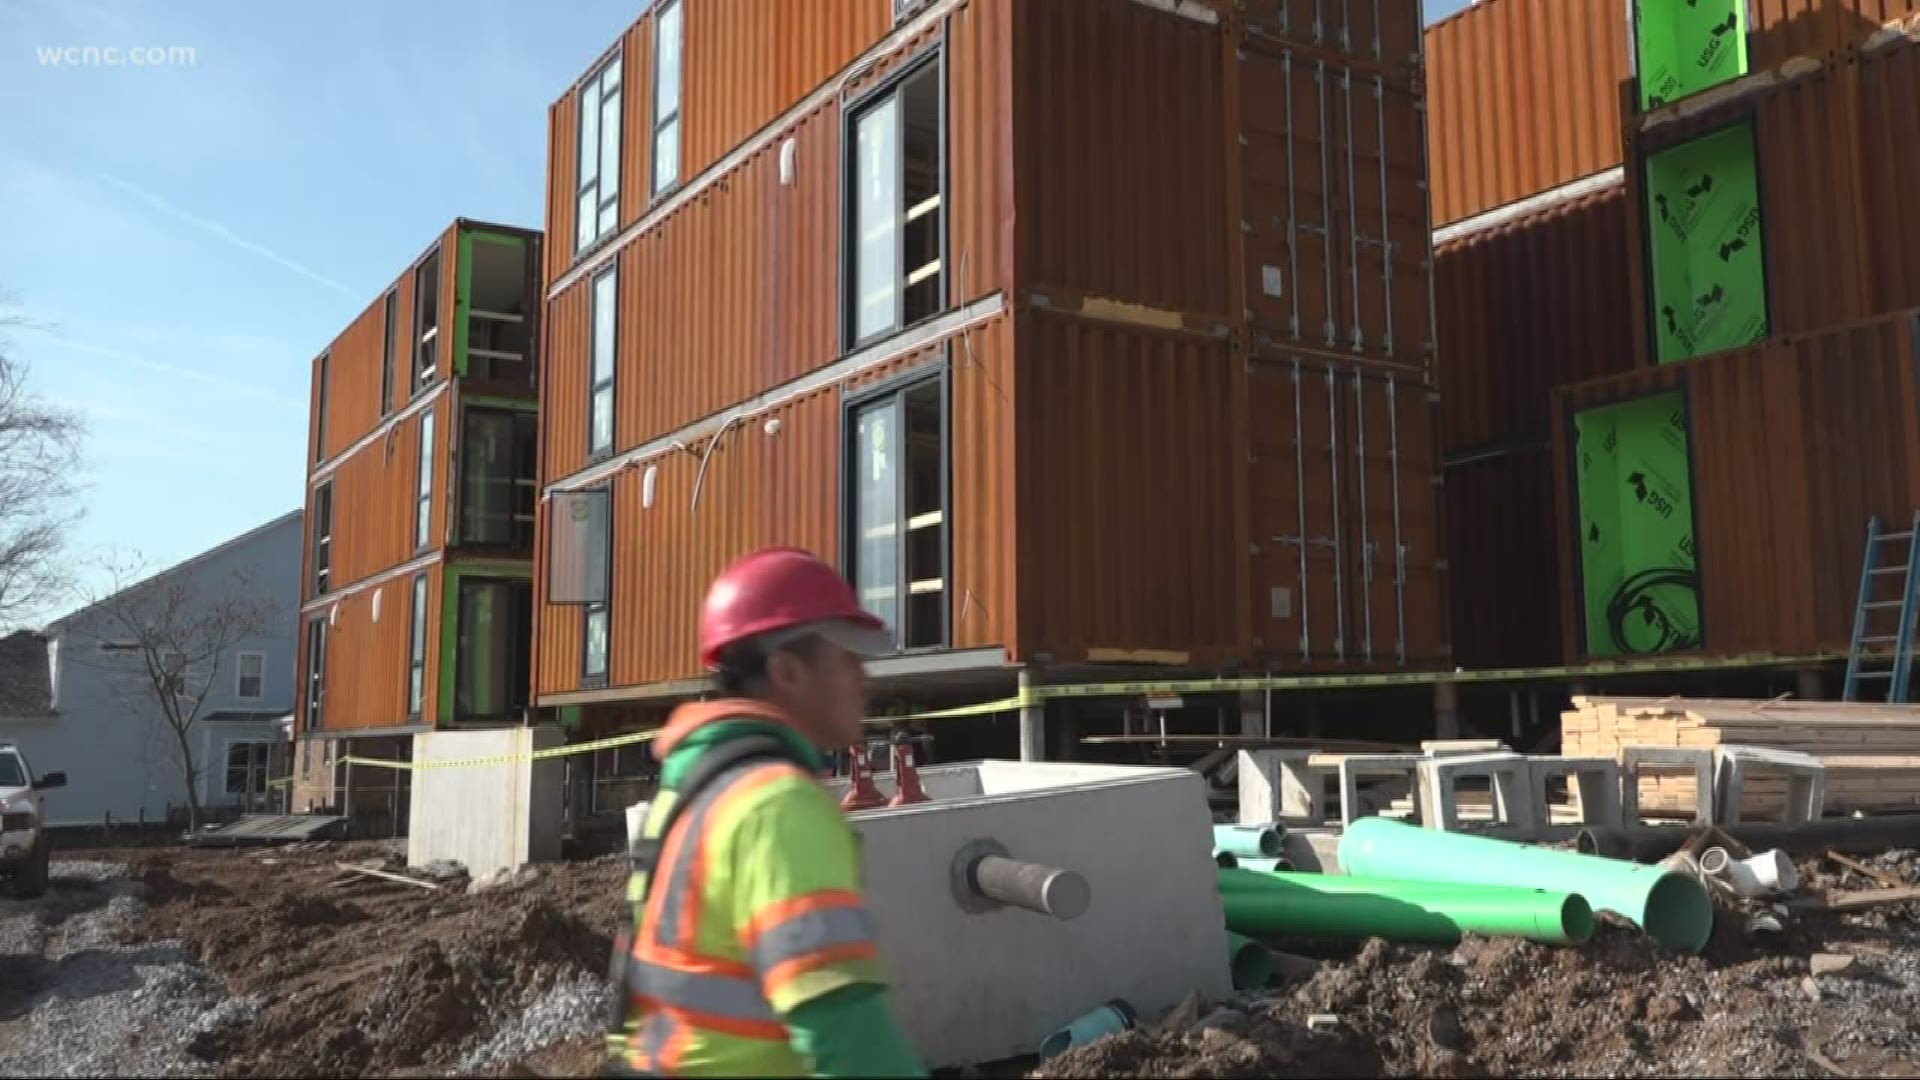 A push to use shipping containers as affordable housing is coming back into the spotlight as the COVID-19 pandemic is putting many out of work.